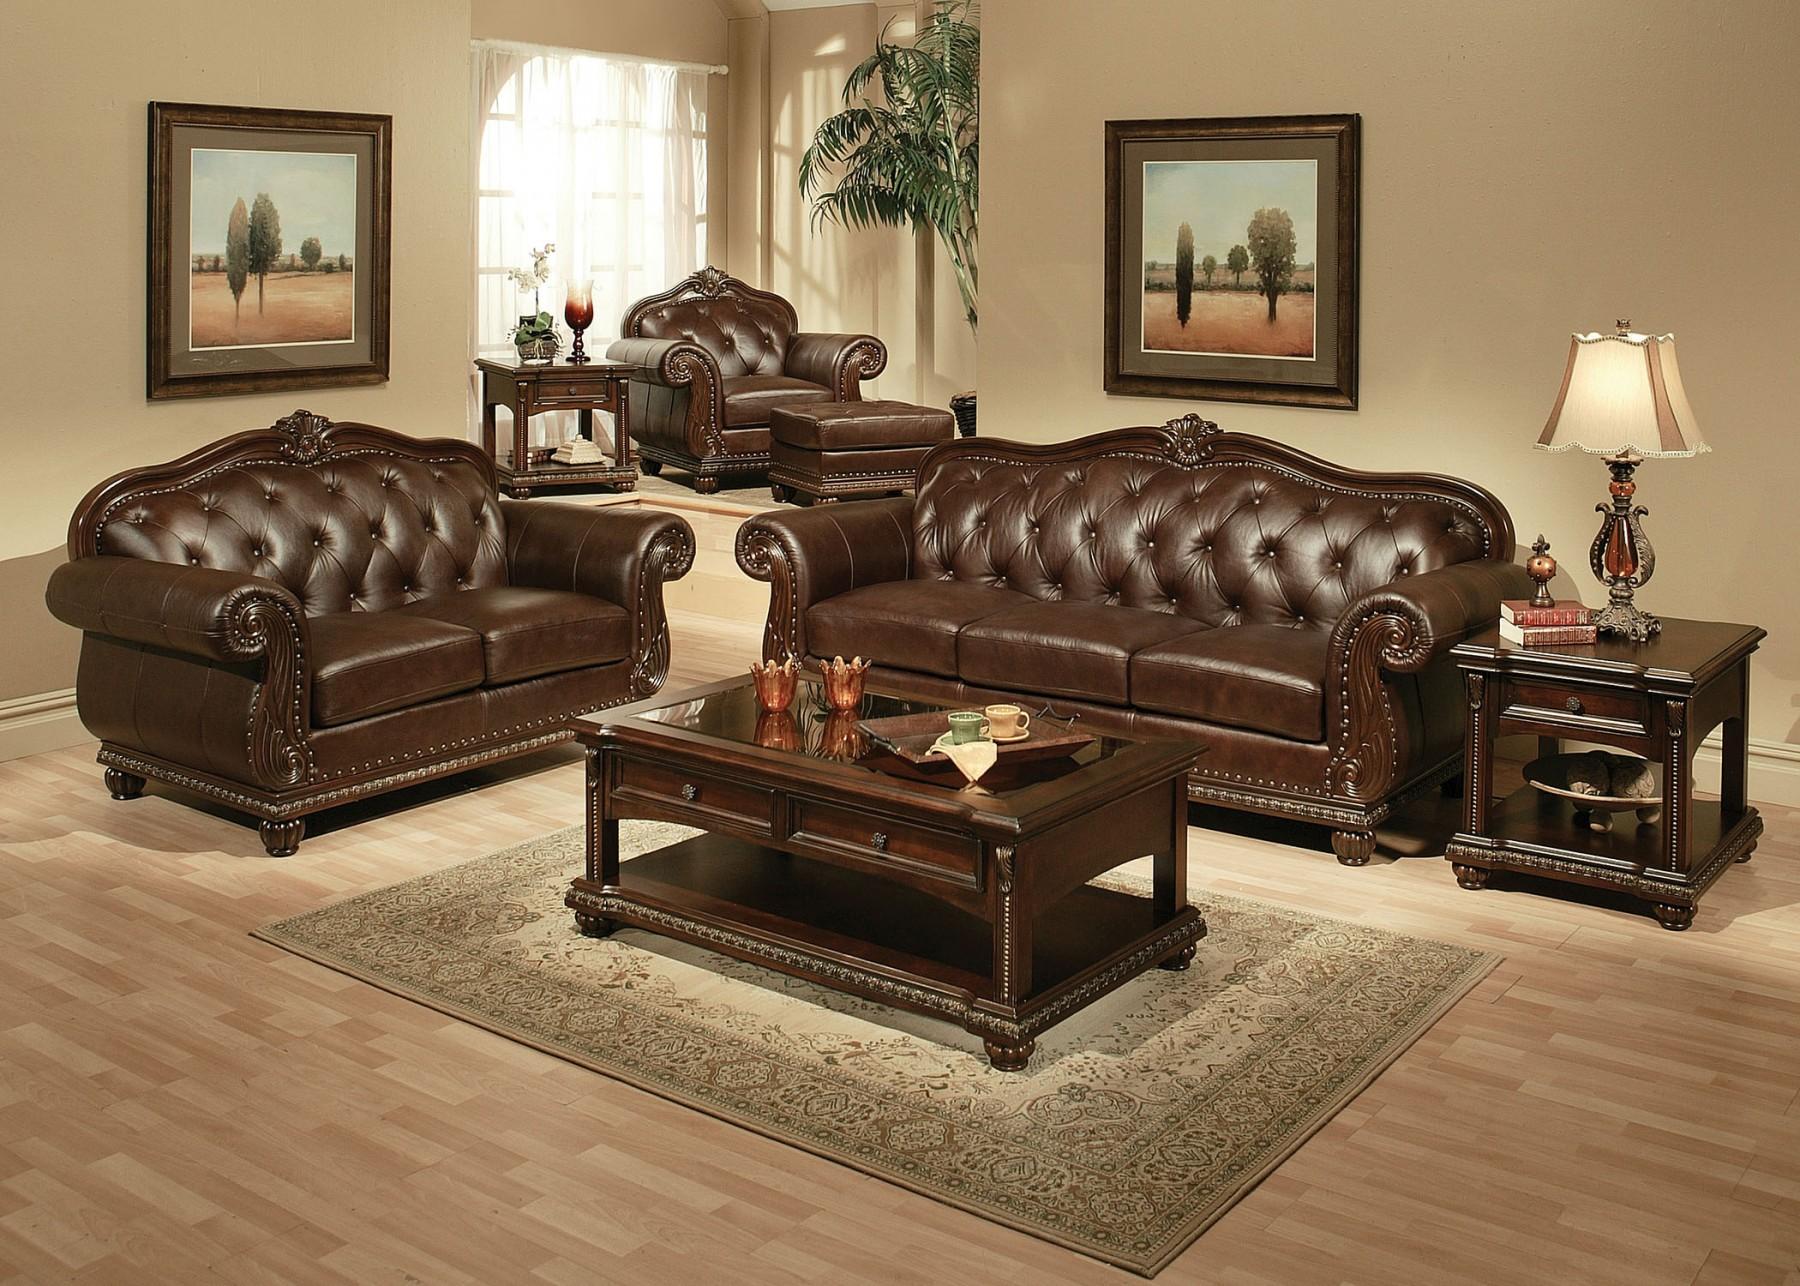 Classic, Traditional Sofa Set Anondale 15030 15030 Anondale Set-2 in Cherry, Espresso Top grain leather